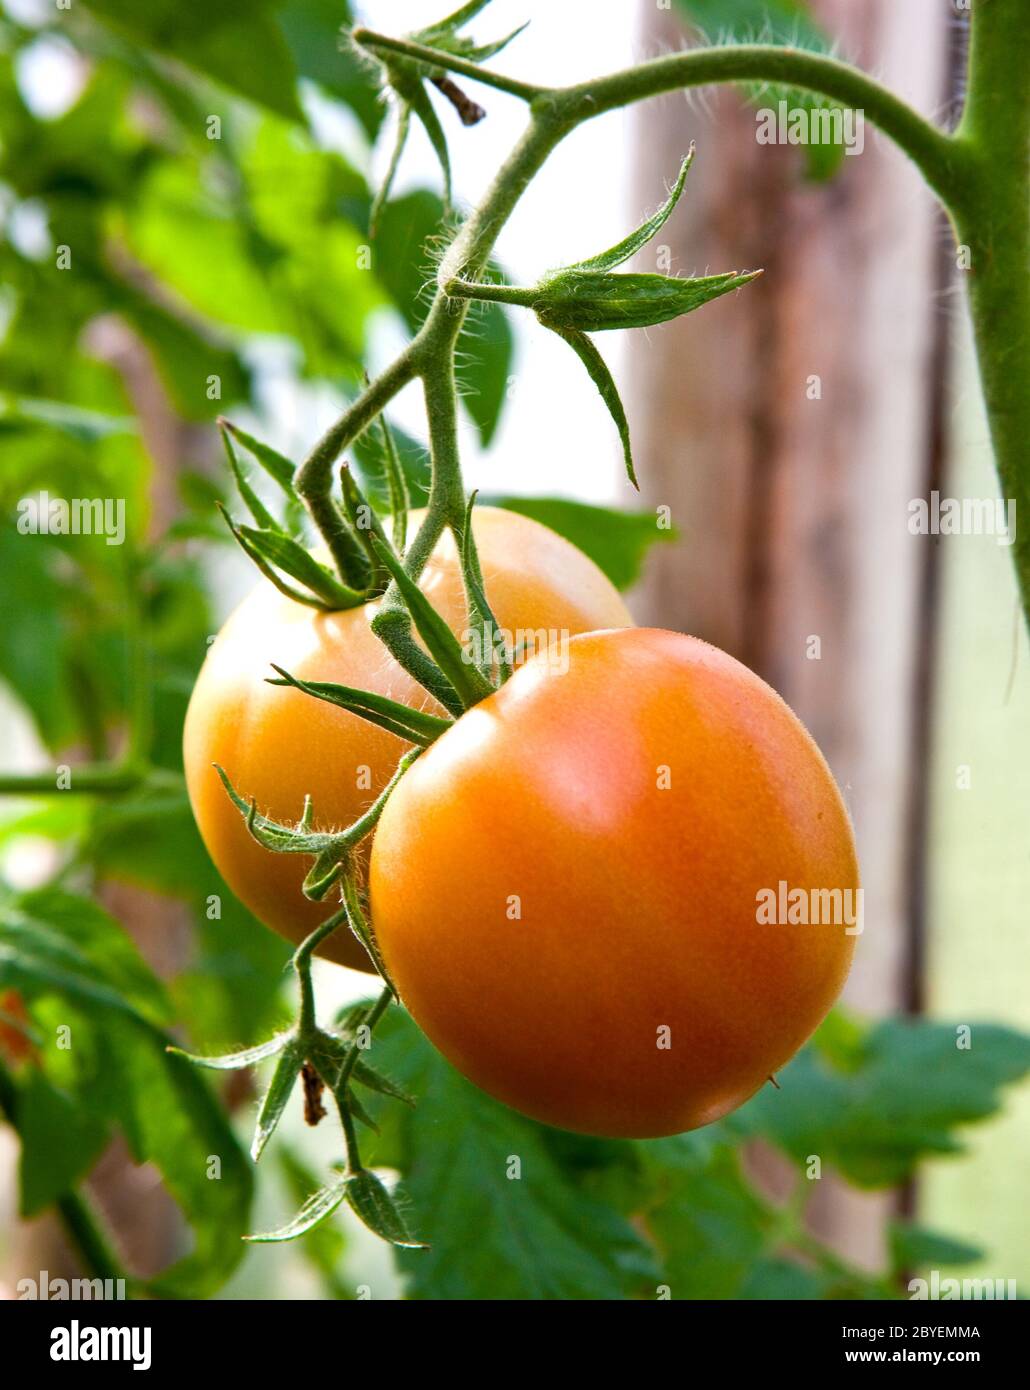 Tomatoes grow on a branch Stock Photo